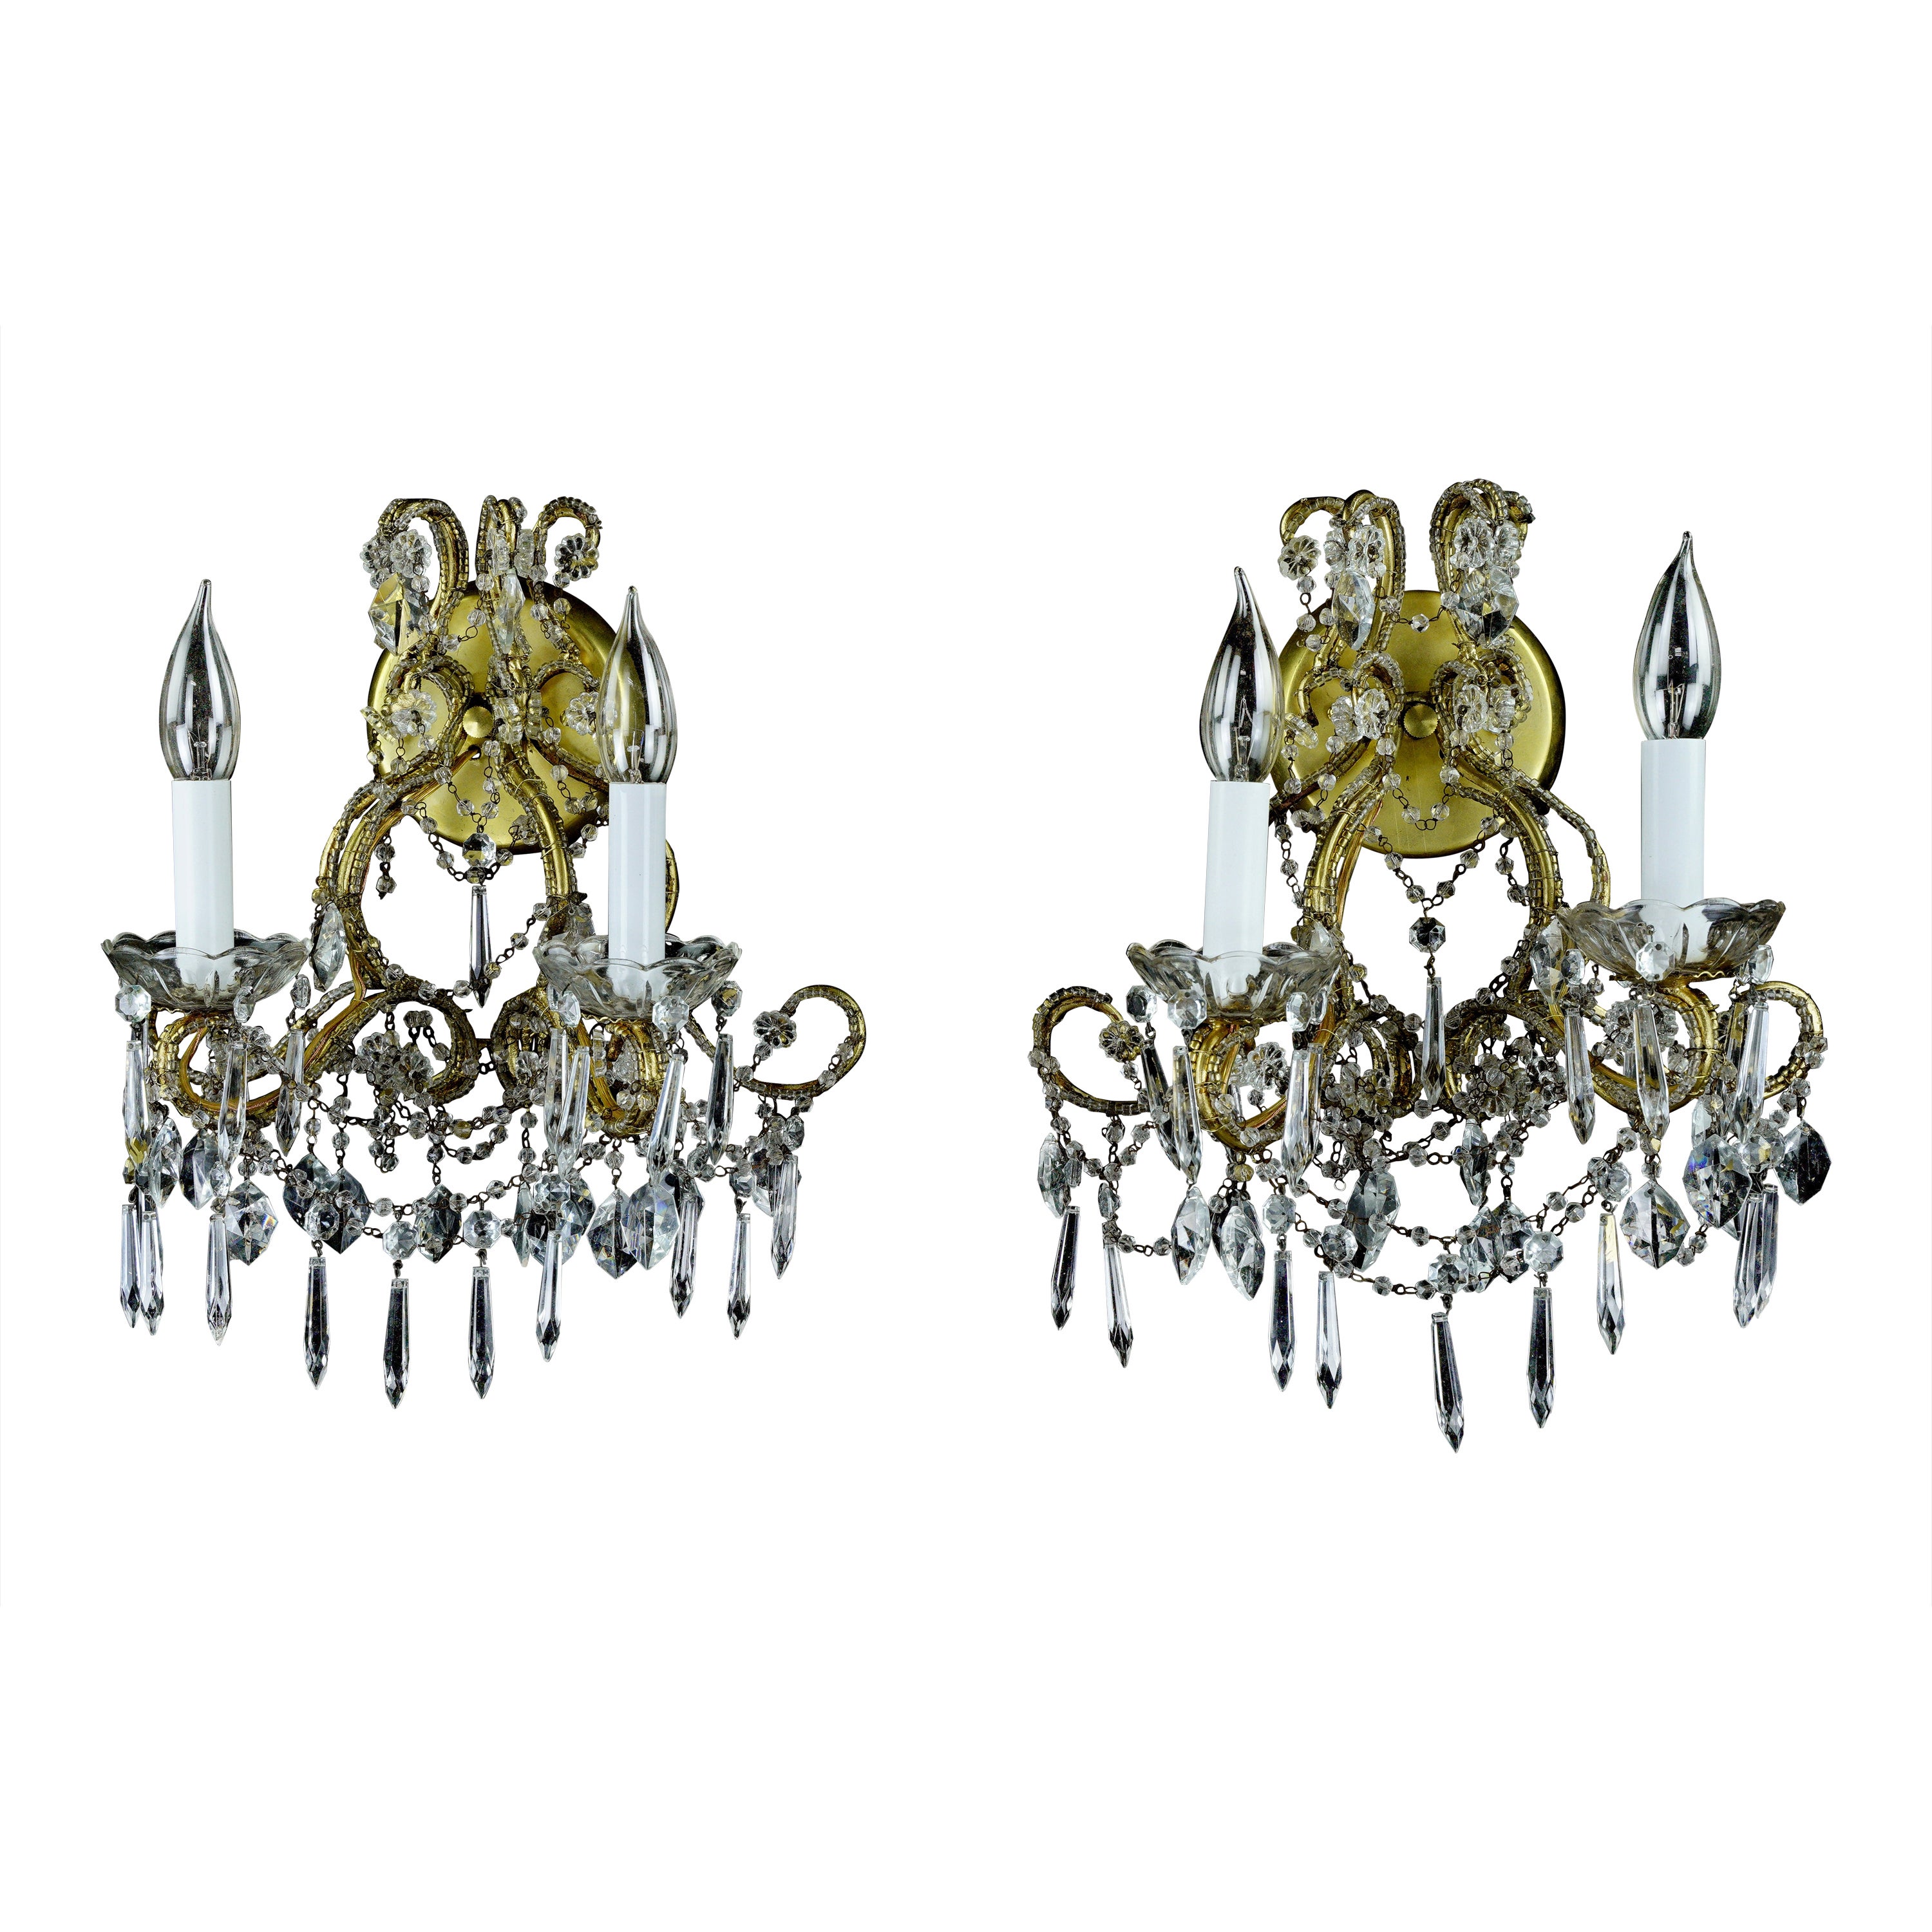 Pair of Victorian Brass & Crystal 2 Arm Wall Sconces